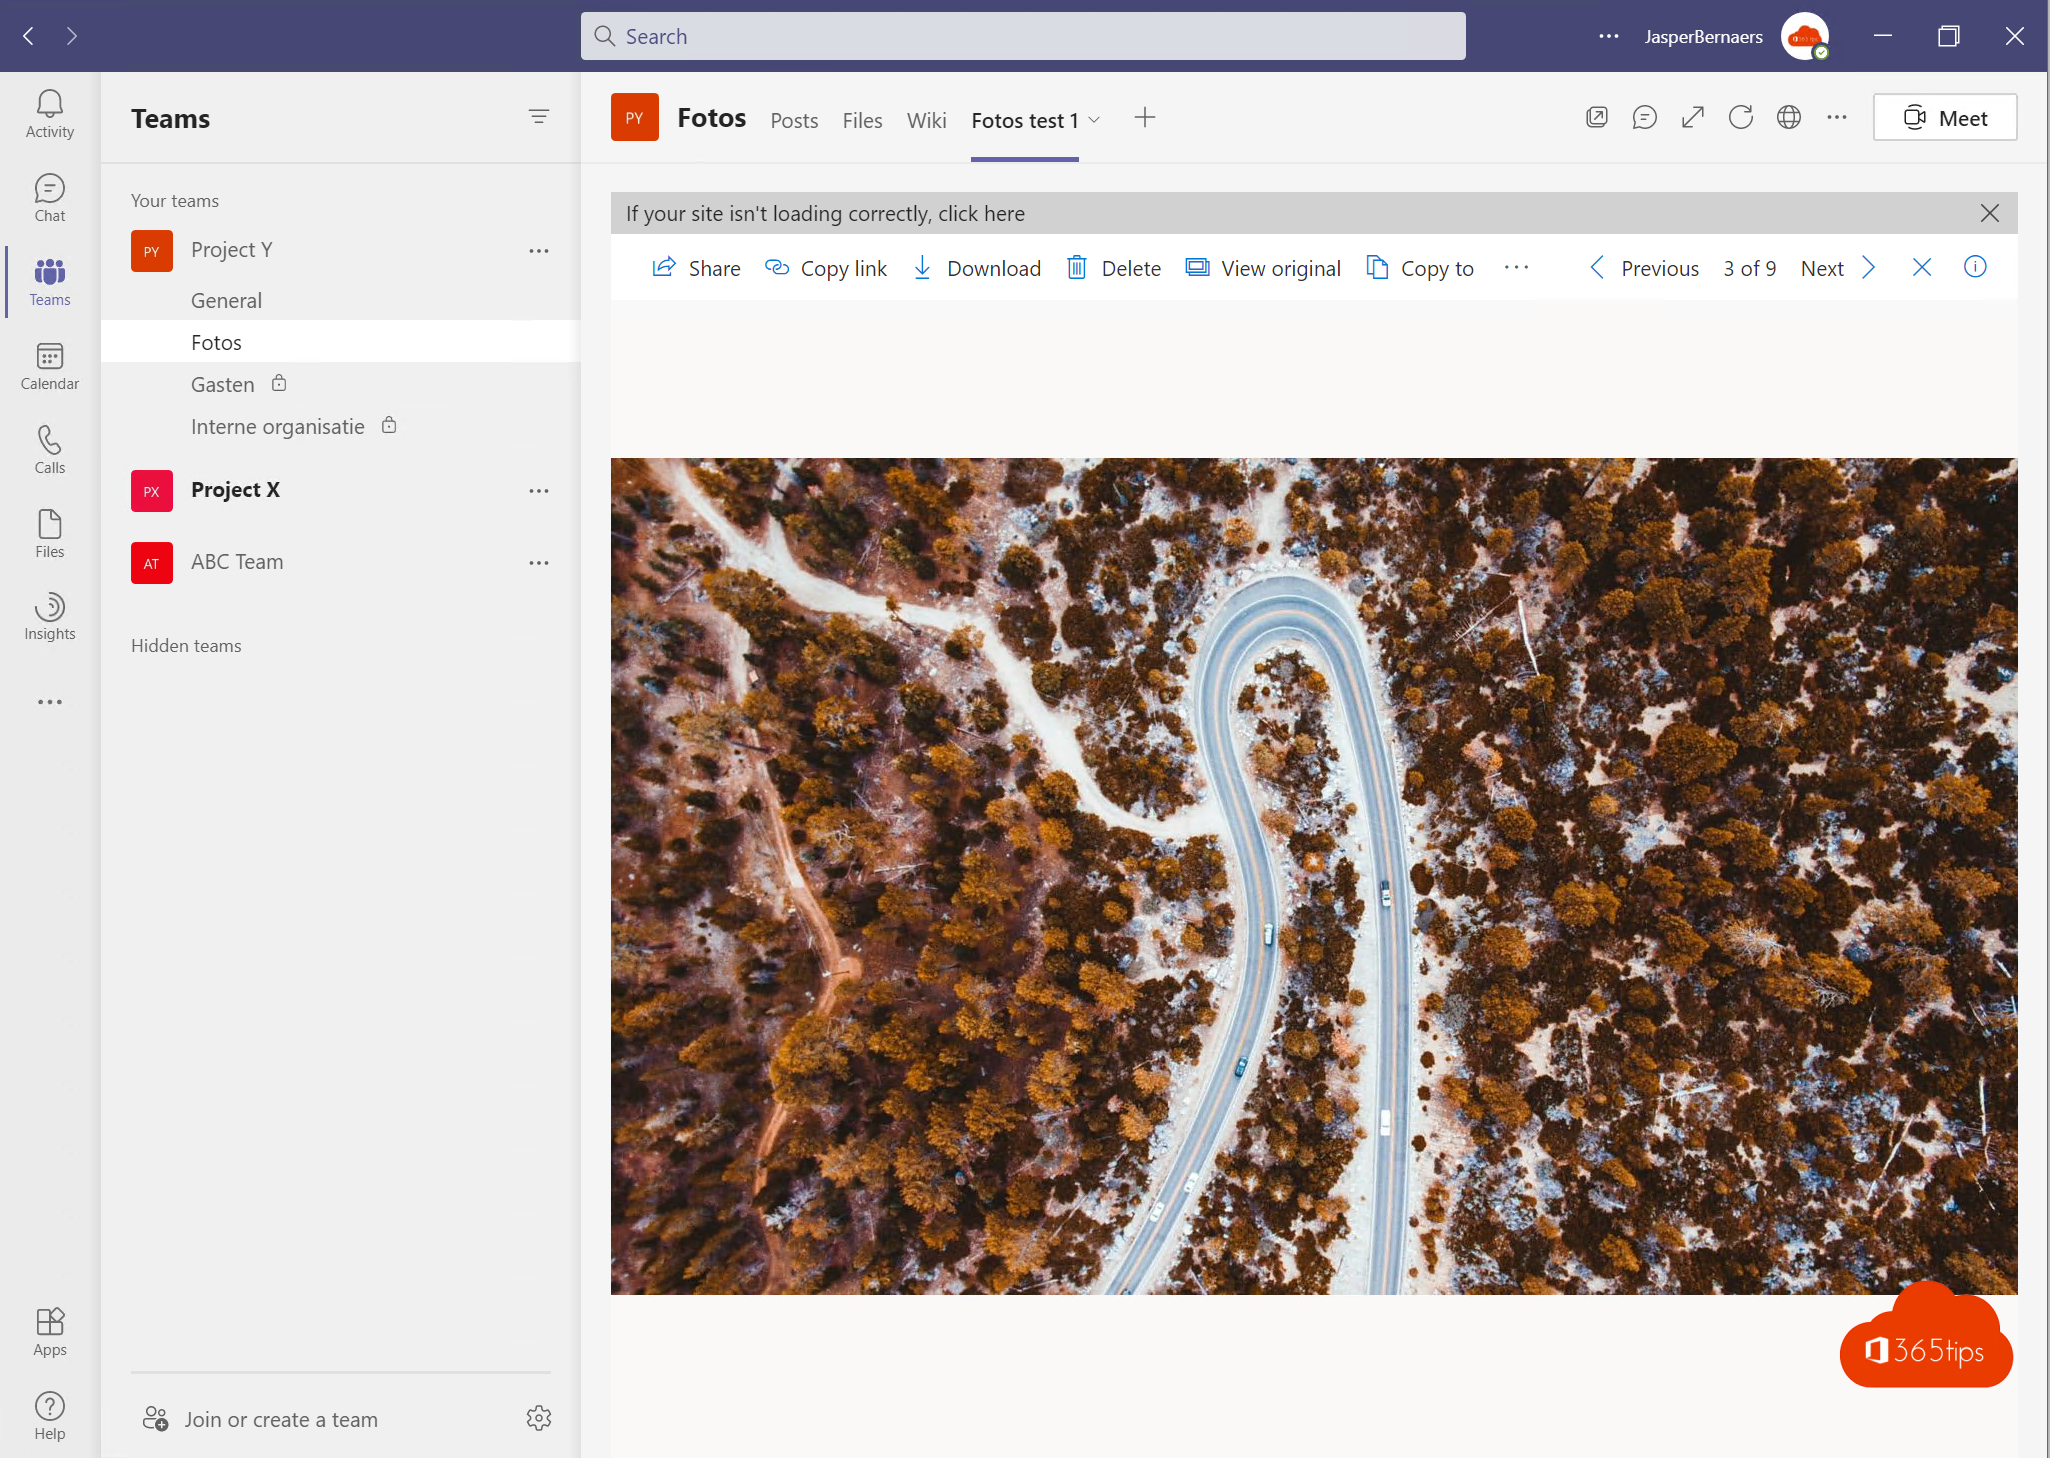 How to set up Photo Galleries in Microsoft Teams - Best practice! 📷